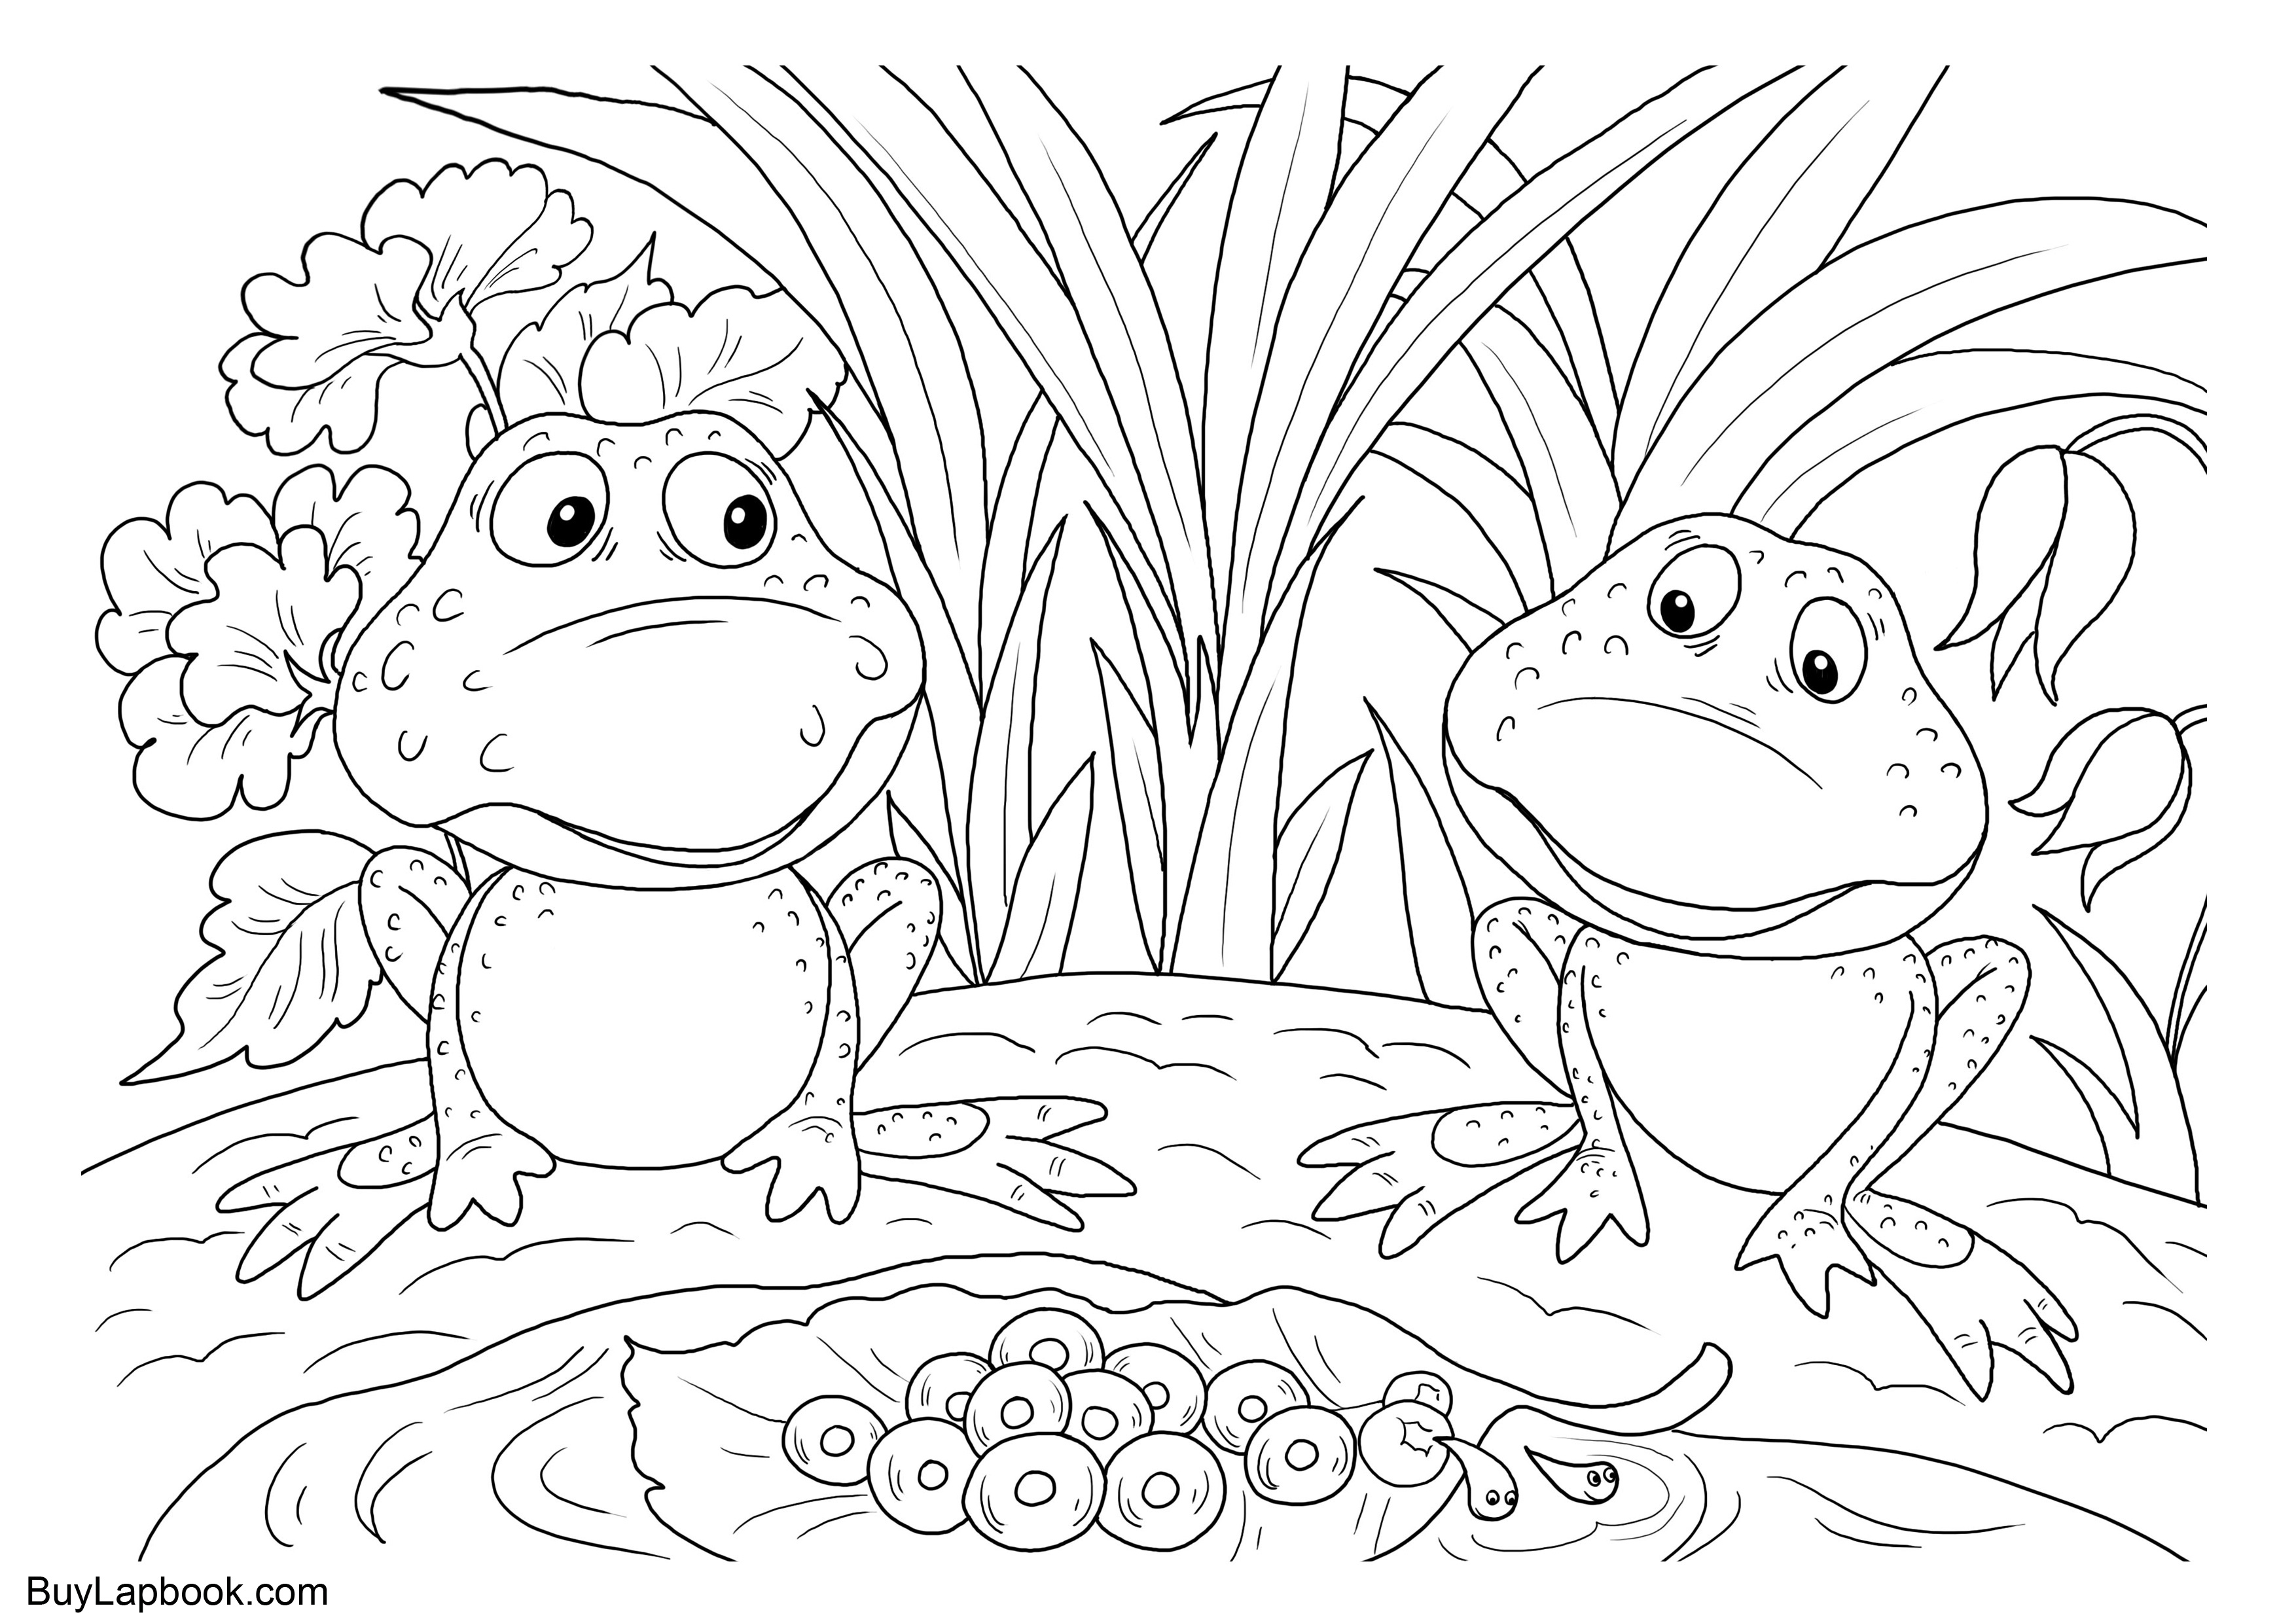 Download The Life Cycle of a Frog. Free Coloring Pages | BuyLapbook